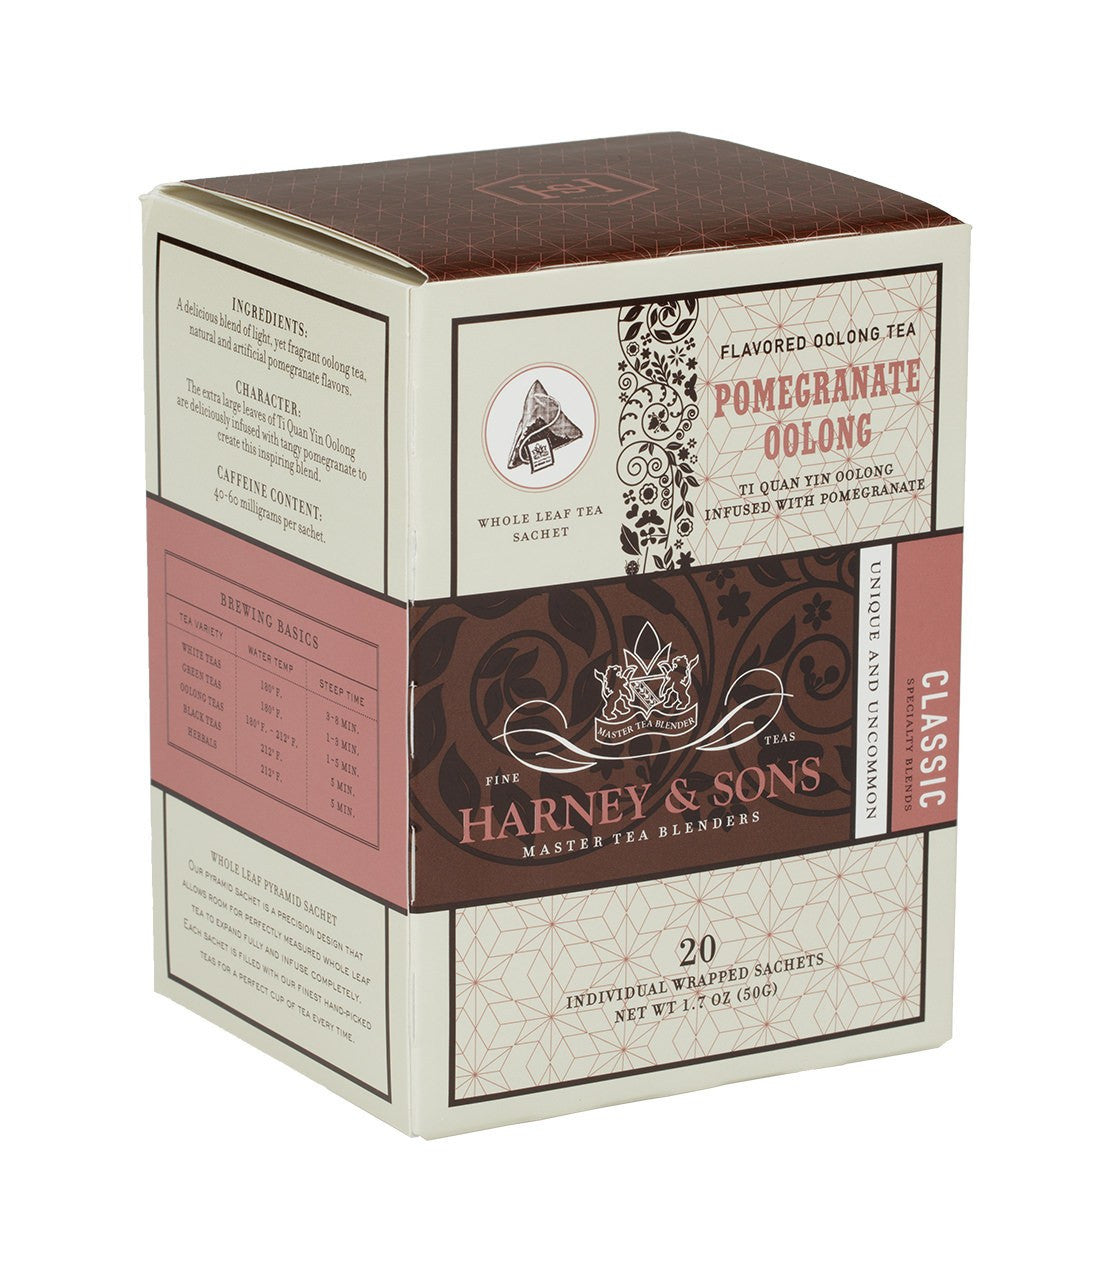 Pomegranate Oolong, Box of 20 Individually Wrapped Sachets - Sachets Box of 20 Individually Wrapped Sachets - Harney & Sons Fine Teas